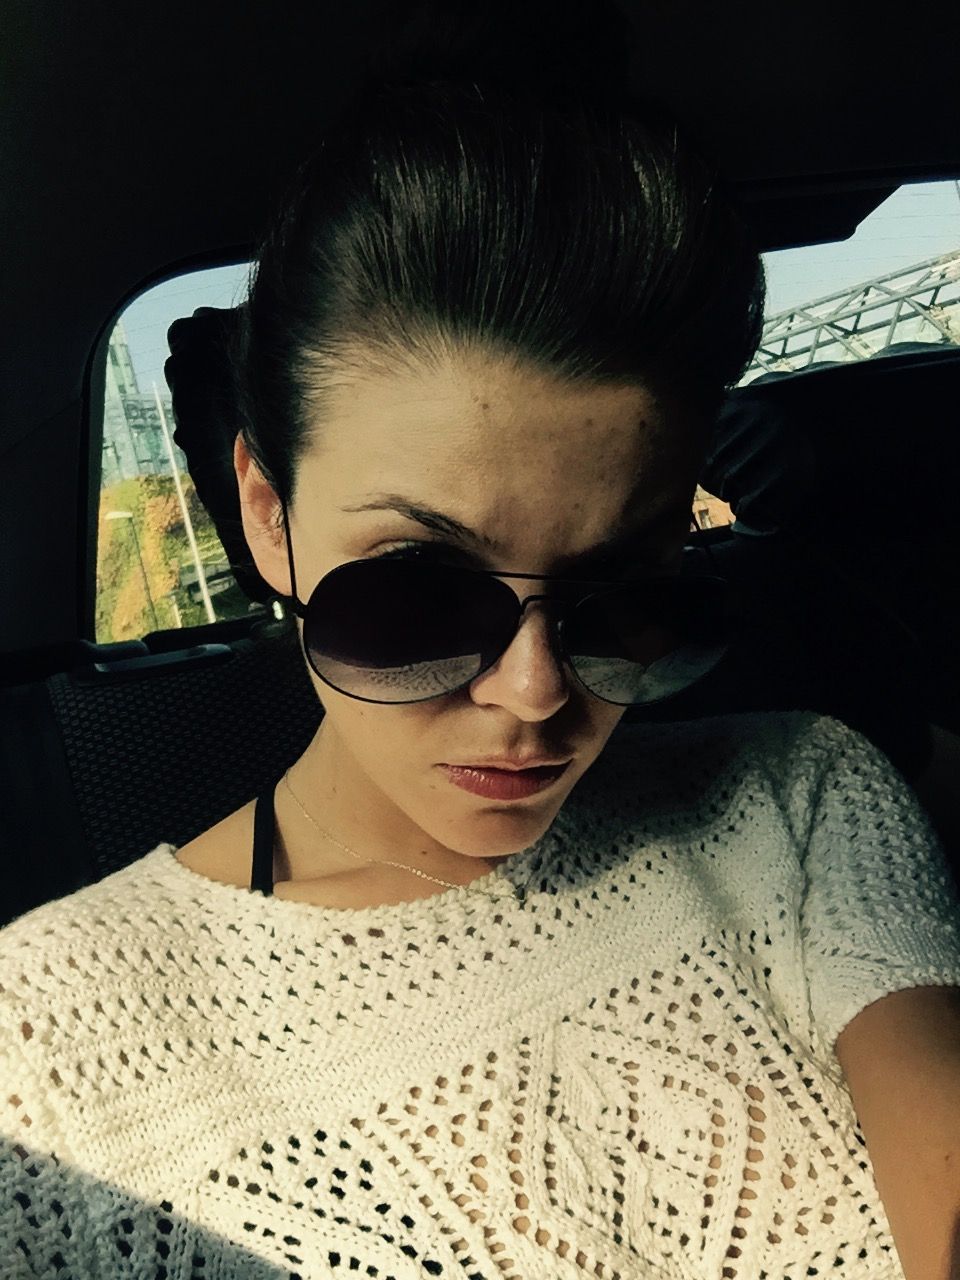 Faye-Brookes-Leaked-1-thefappening_nu_218a3b2.jpg